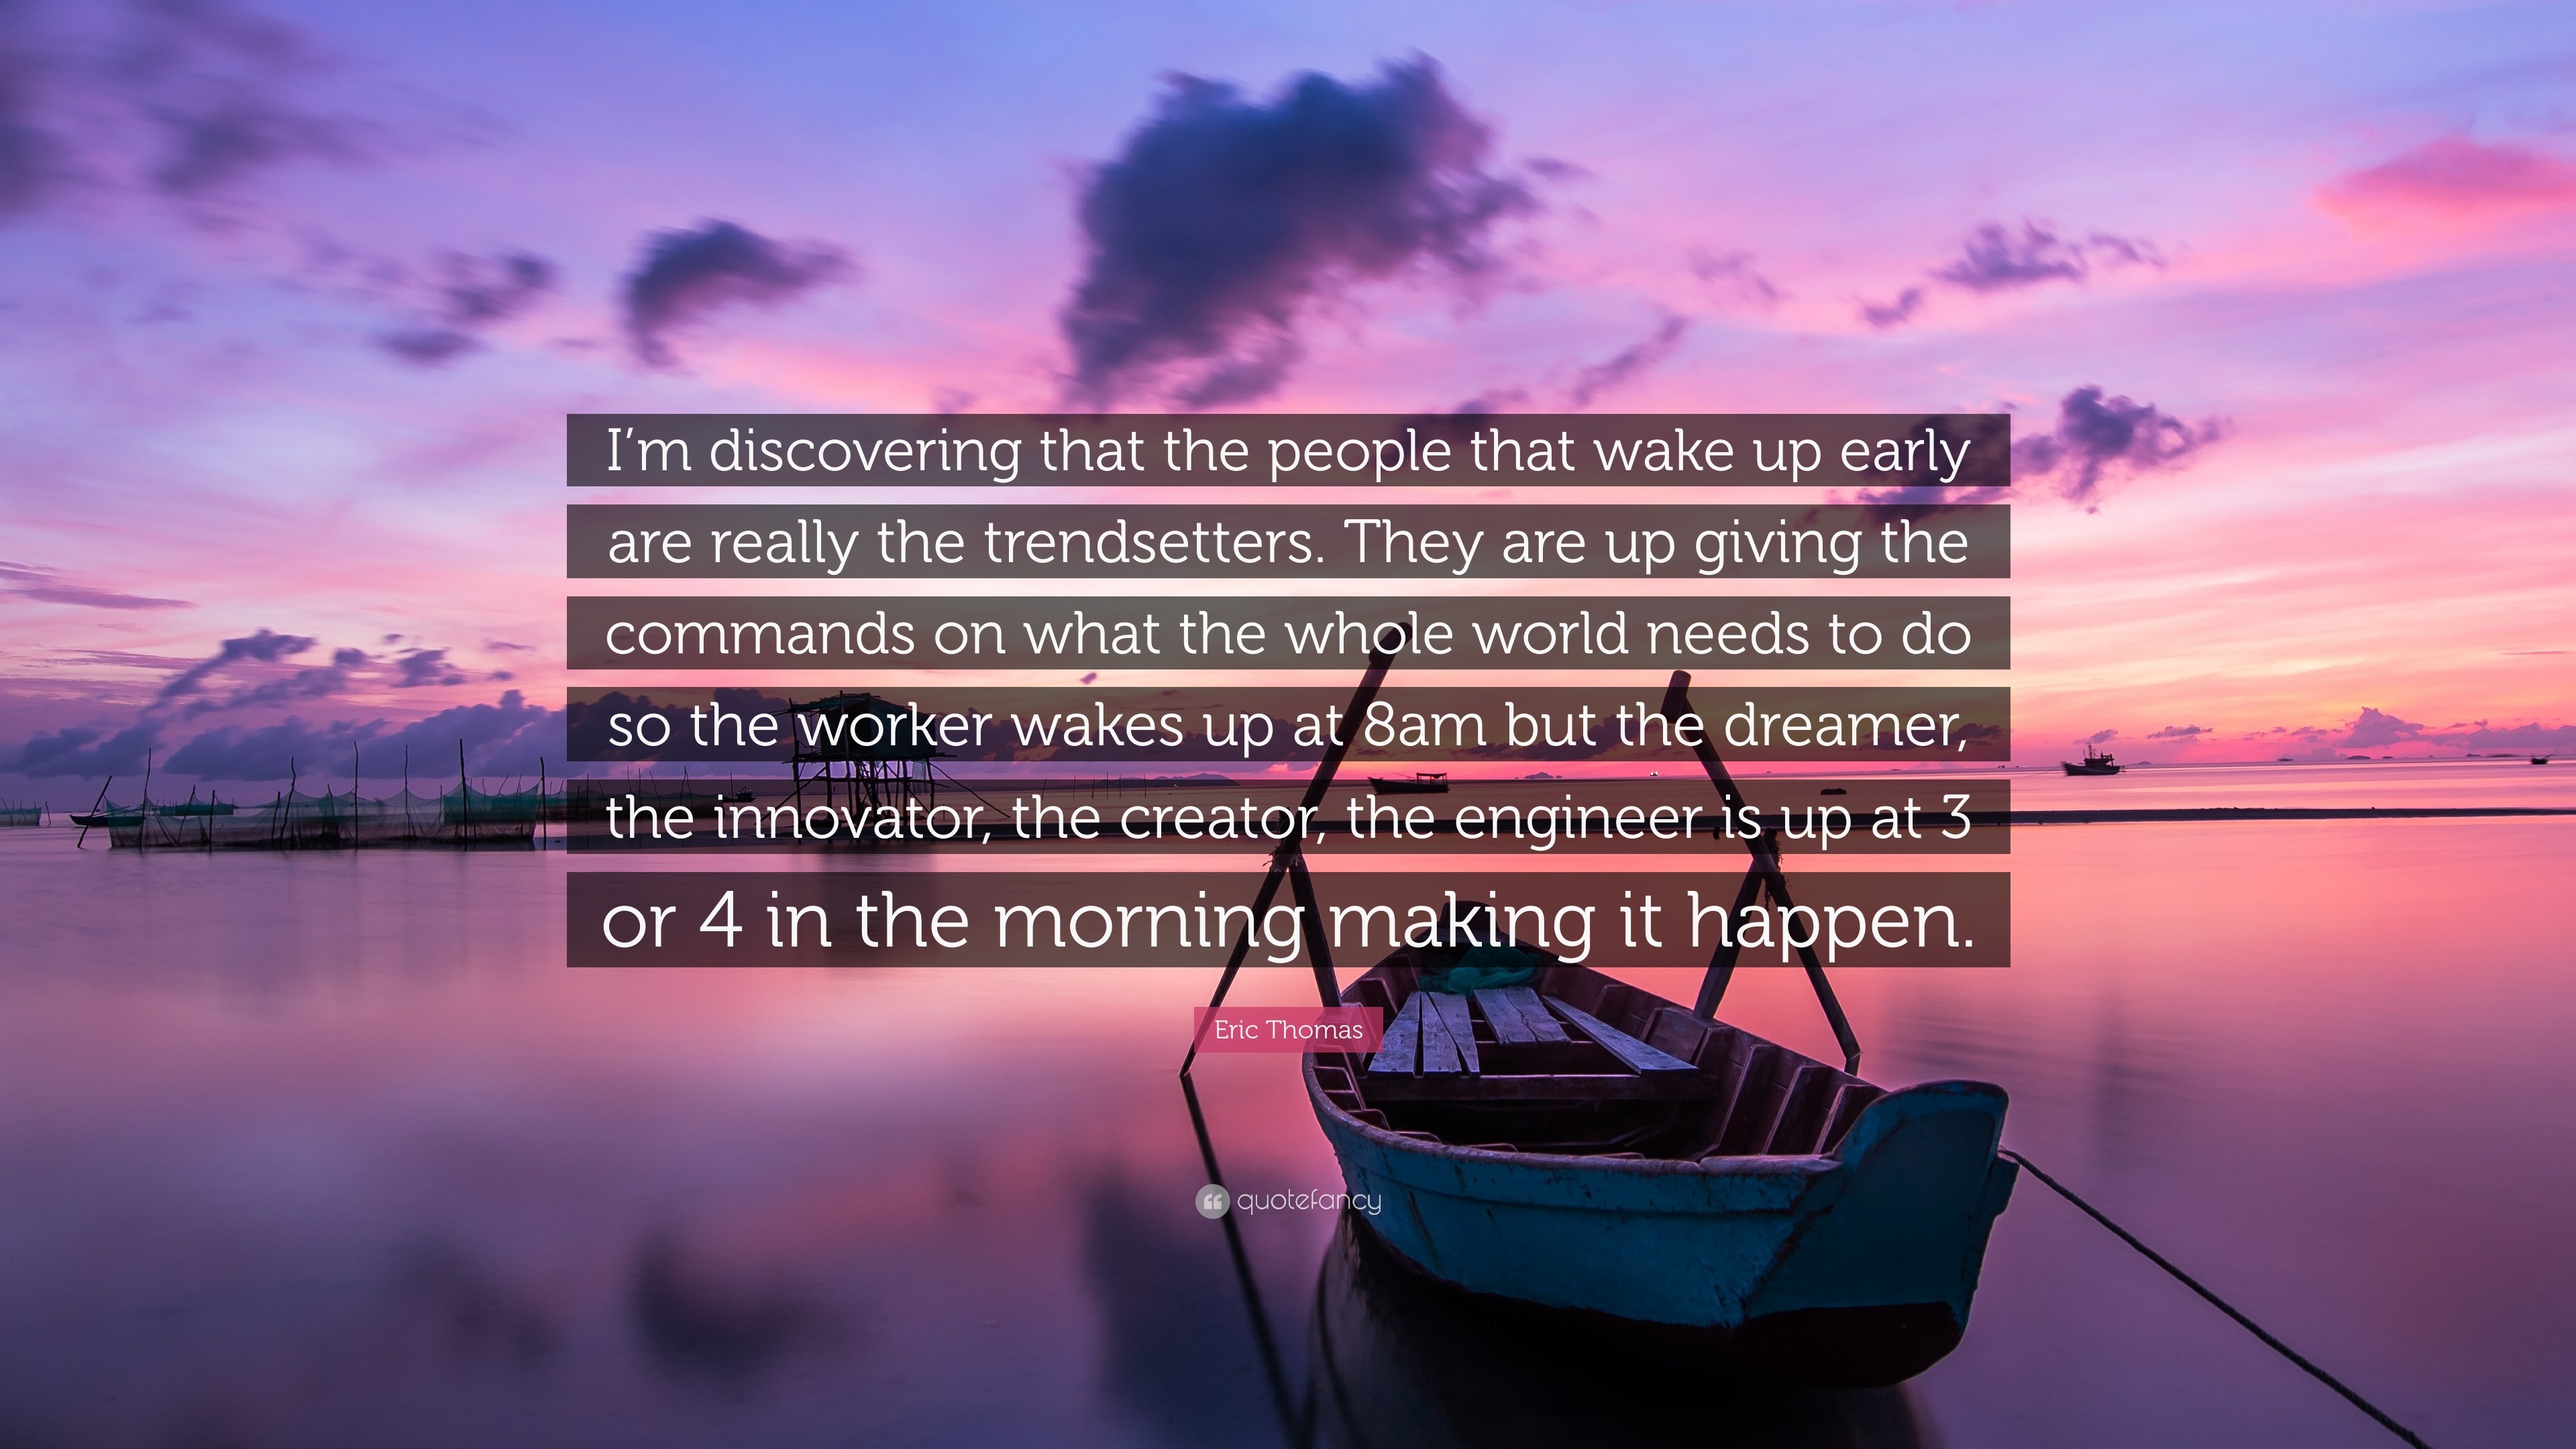 3840x2160 Eric Thomas Quote: “I'm discovering that the people that wake up early